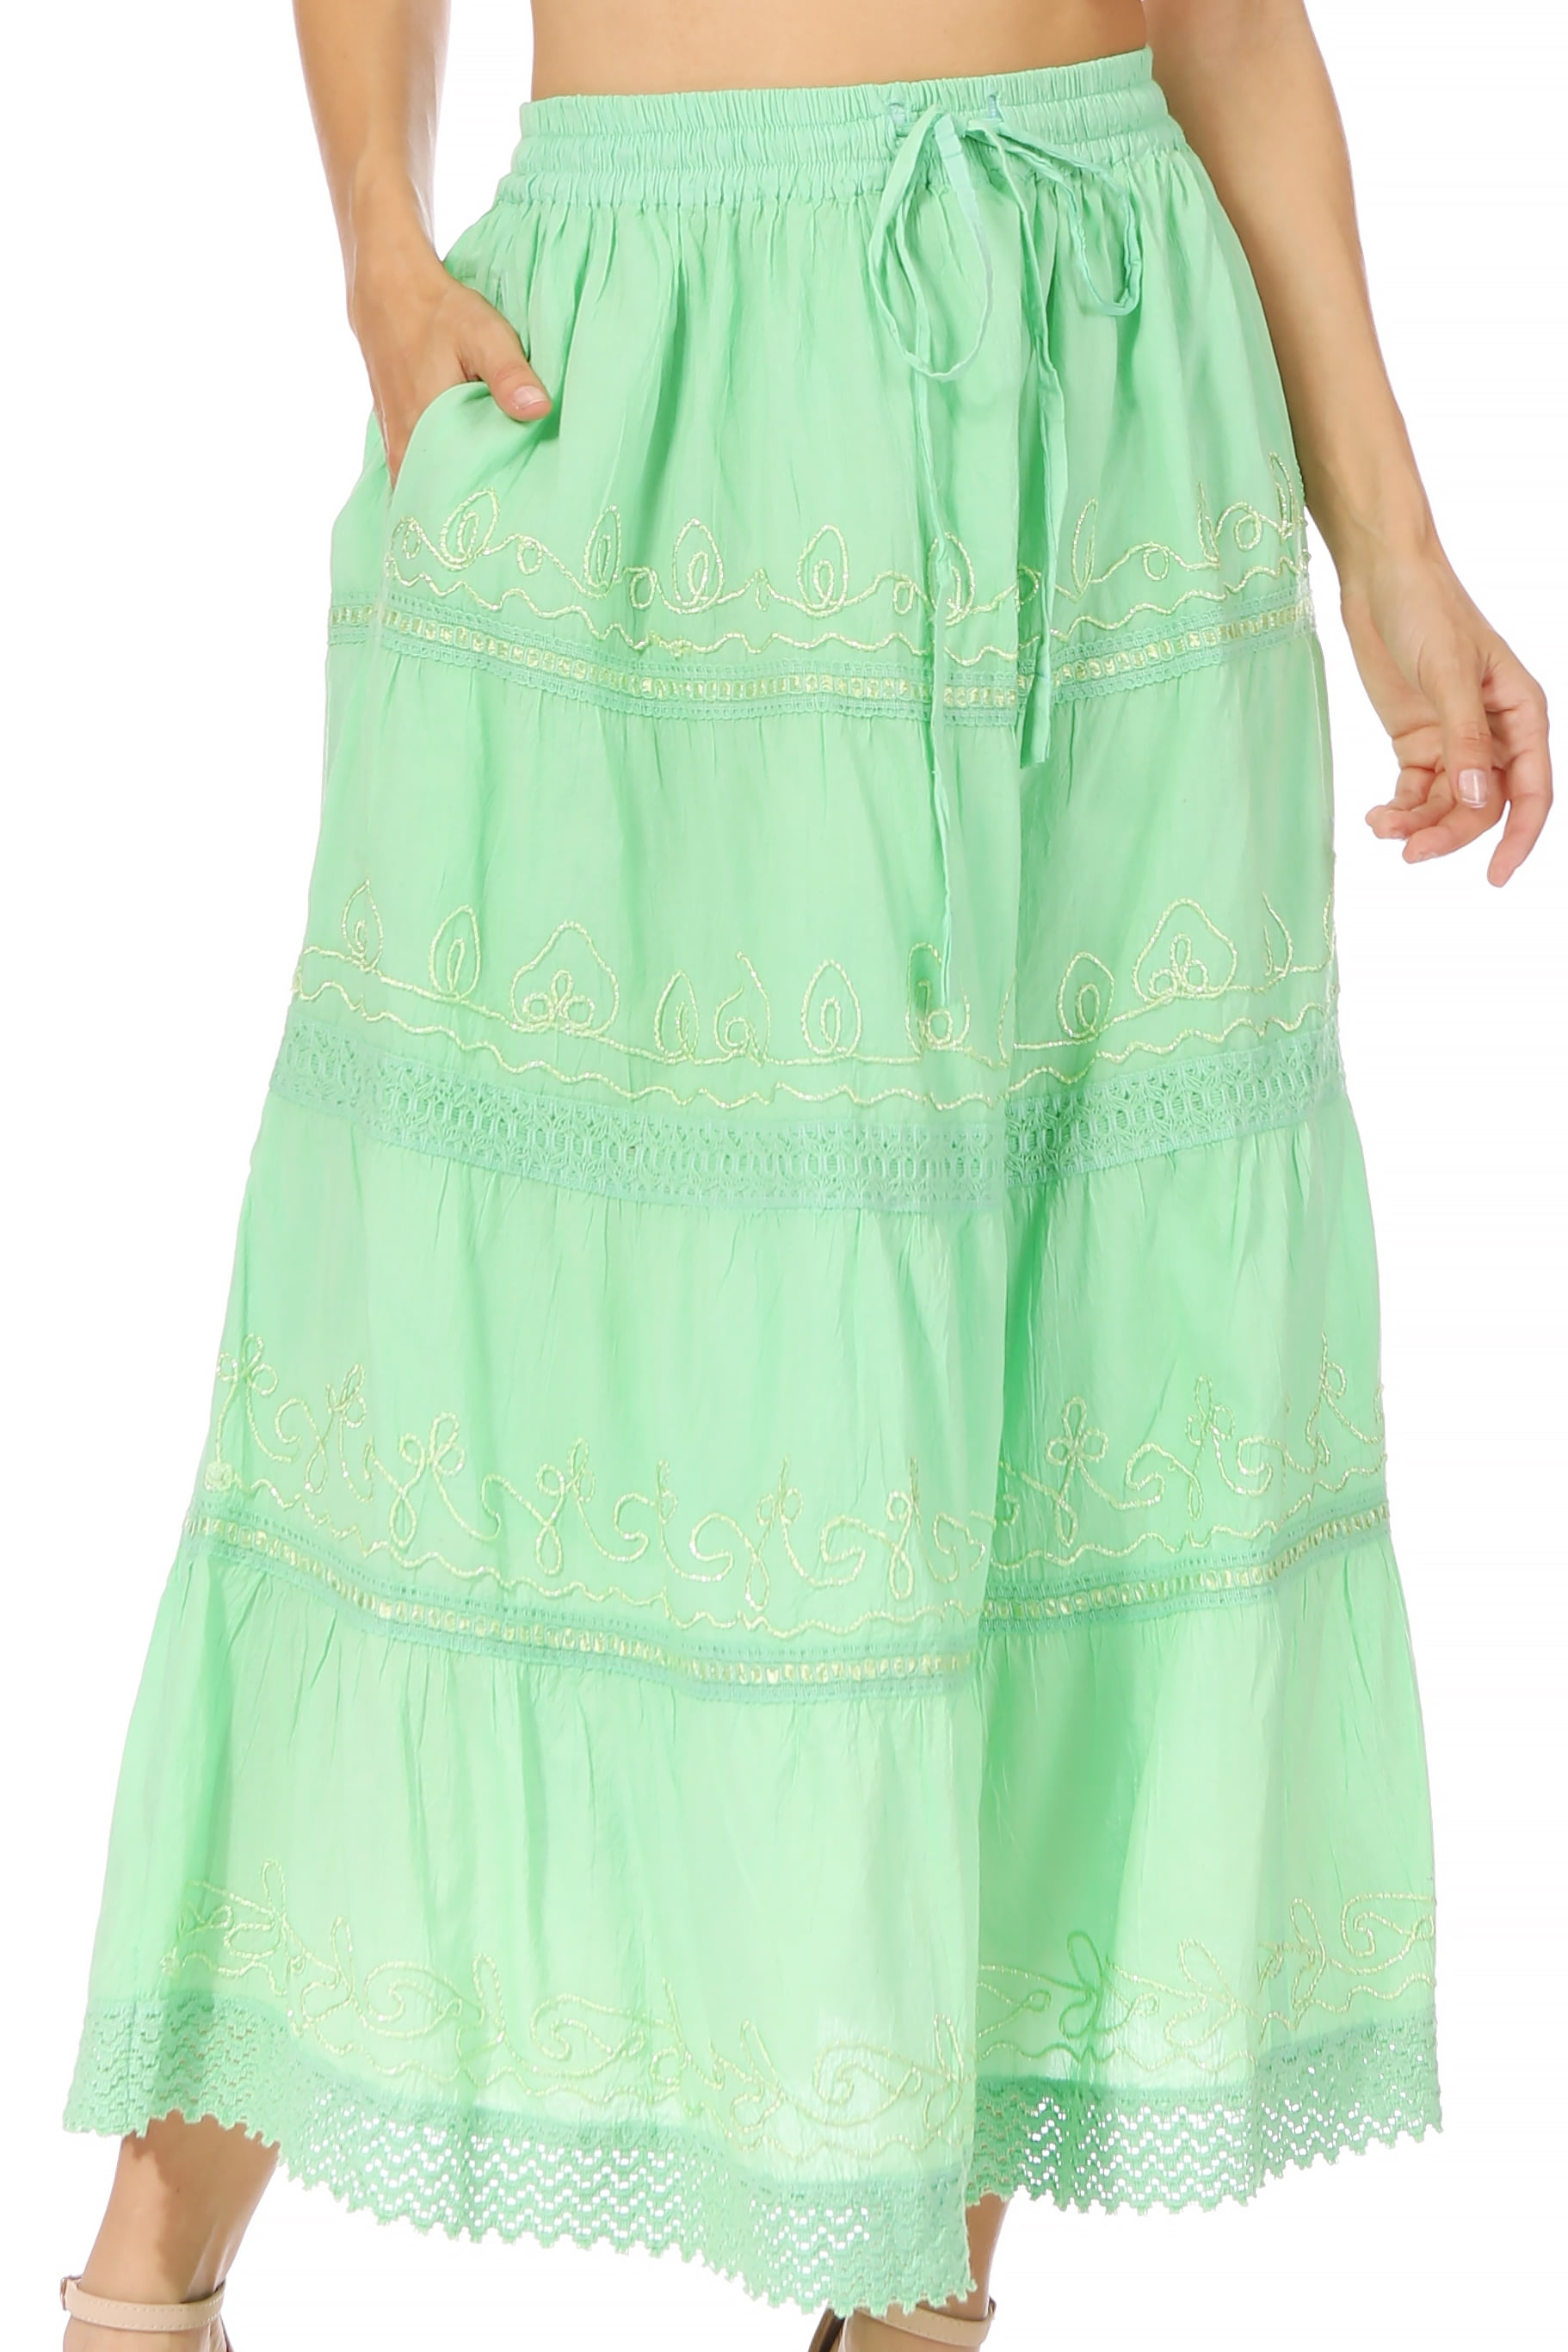 Sakkas Solid Embroidered Crochet Lace Trim Gypsy Bohemian Mid Length Cotton  Skirt - Springgreen - One Size - Walmart.com